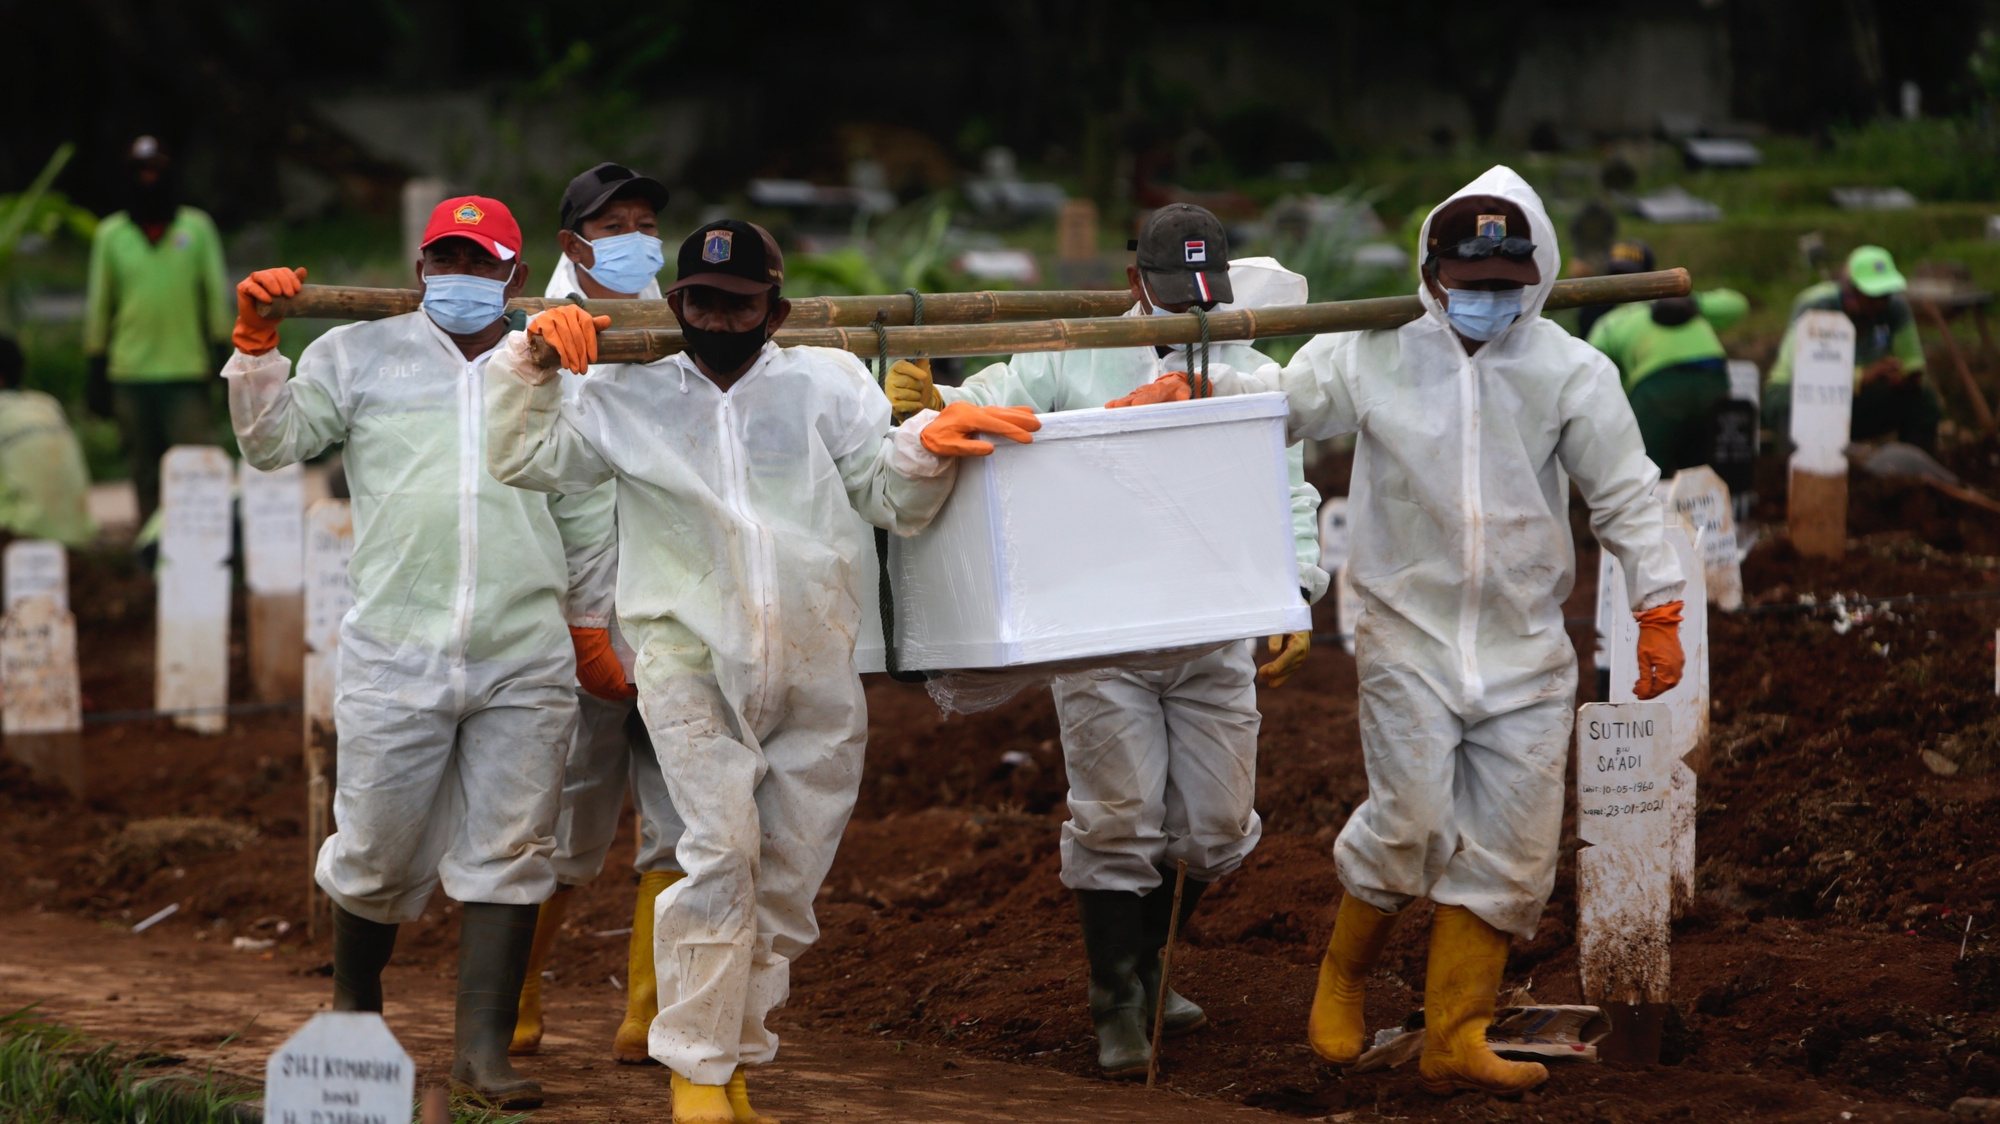 epa08970591 Workers clad in hazmat suits carrying the coffin of a COVID-19 victim during a funeral at Bambu Apus Cemetery in Jakarta, Indonesia, 28 January 2021. Indonesia has reported more than one million COVID-19 cases since the beginning of the pandemic, the highest number in Southeast Asia.  EPA/ADI WEDA